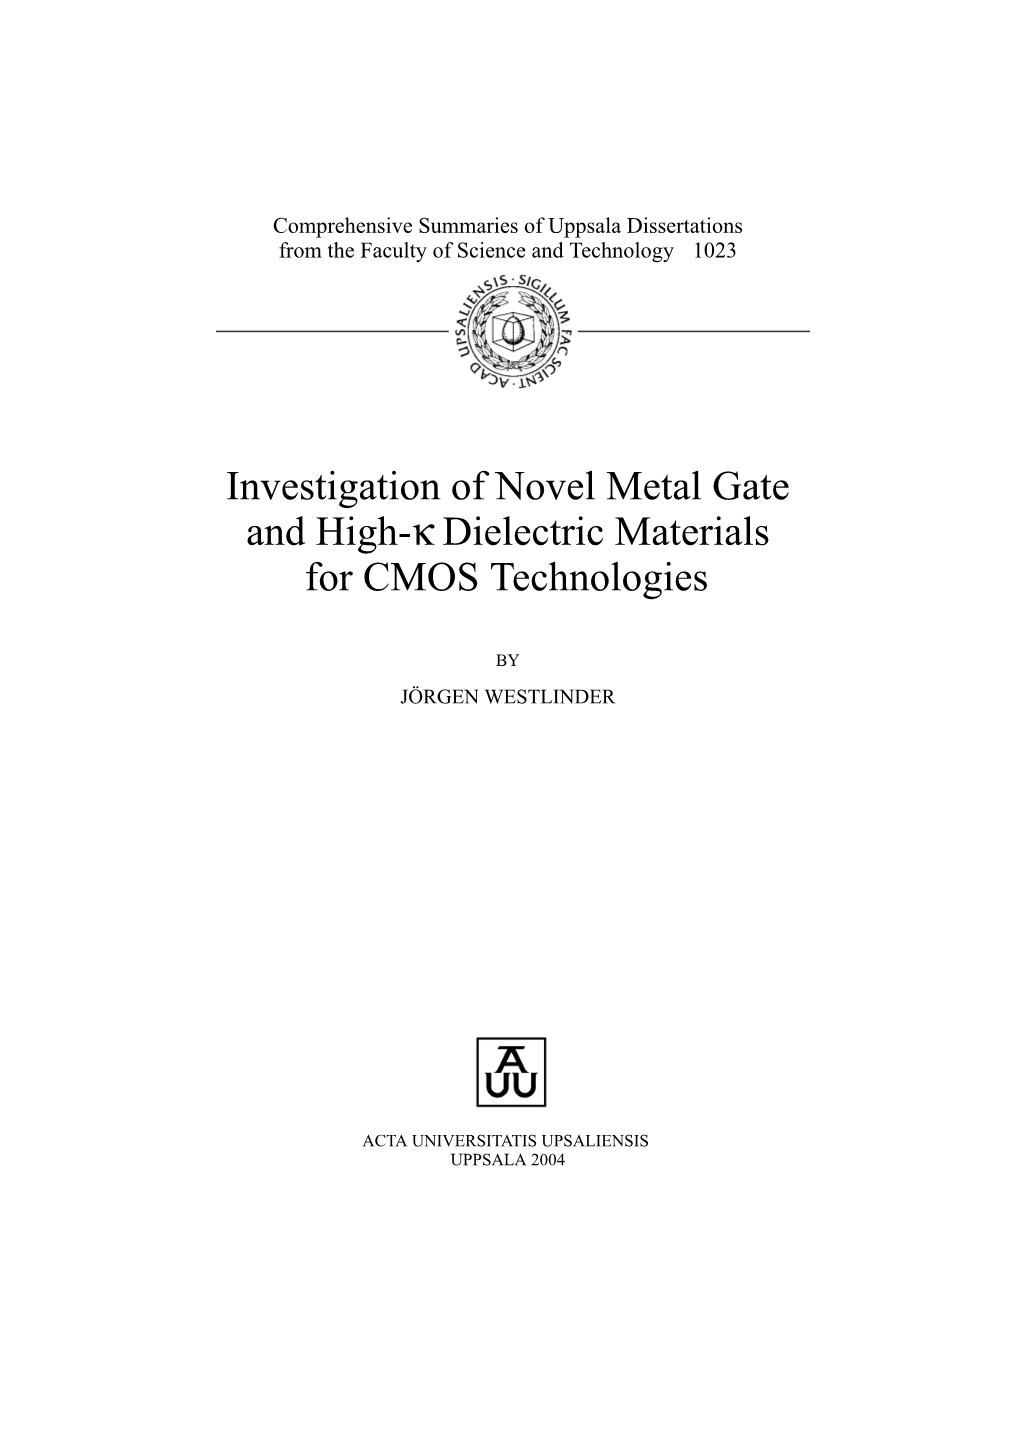 Investigation of Novel Metal Gate and High-Κ Dielectric Materials for CMOS Technologies